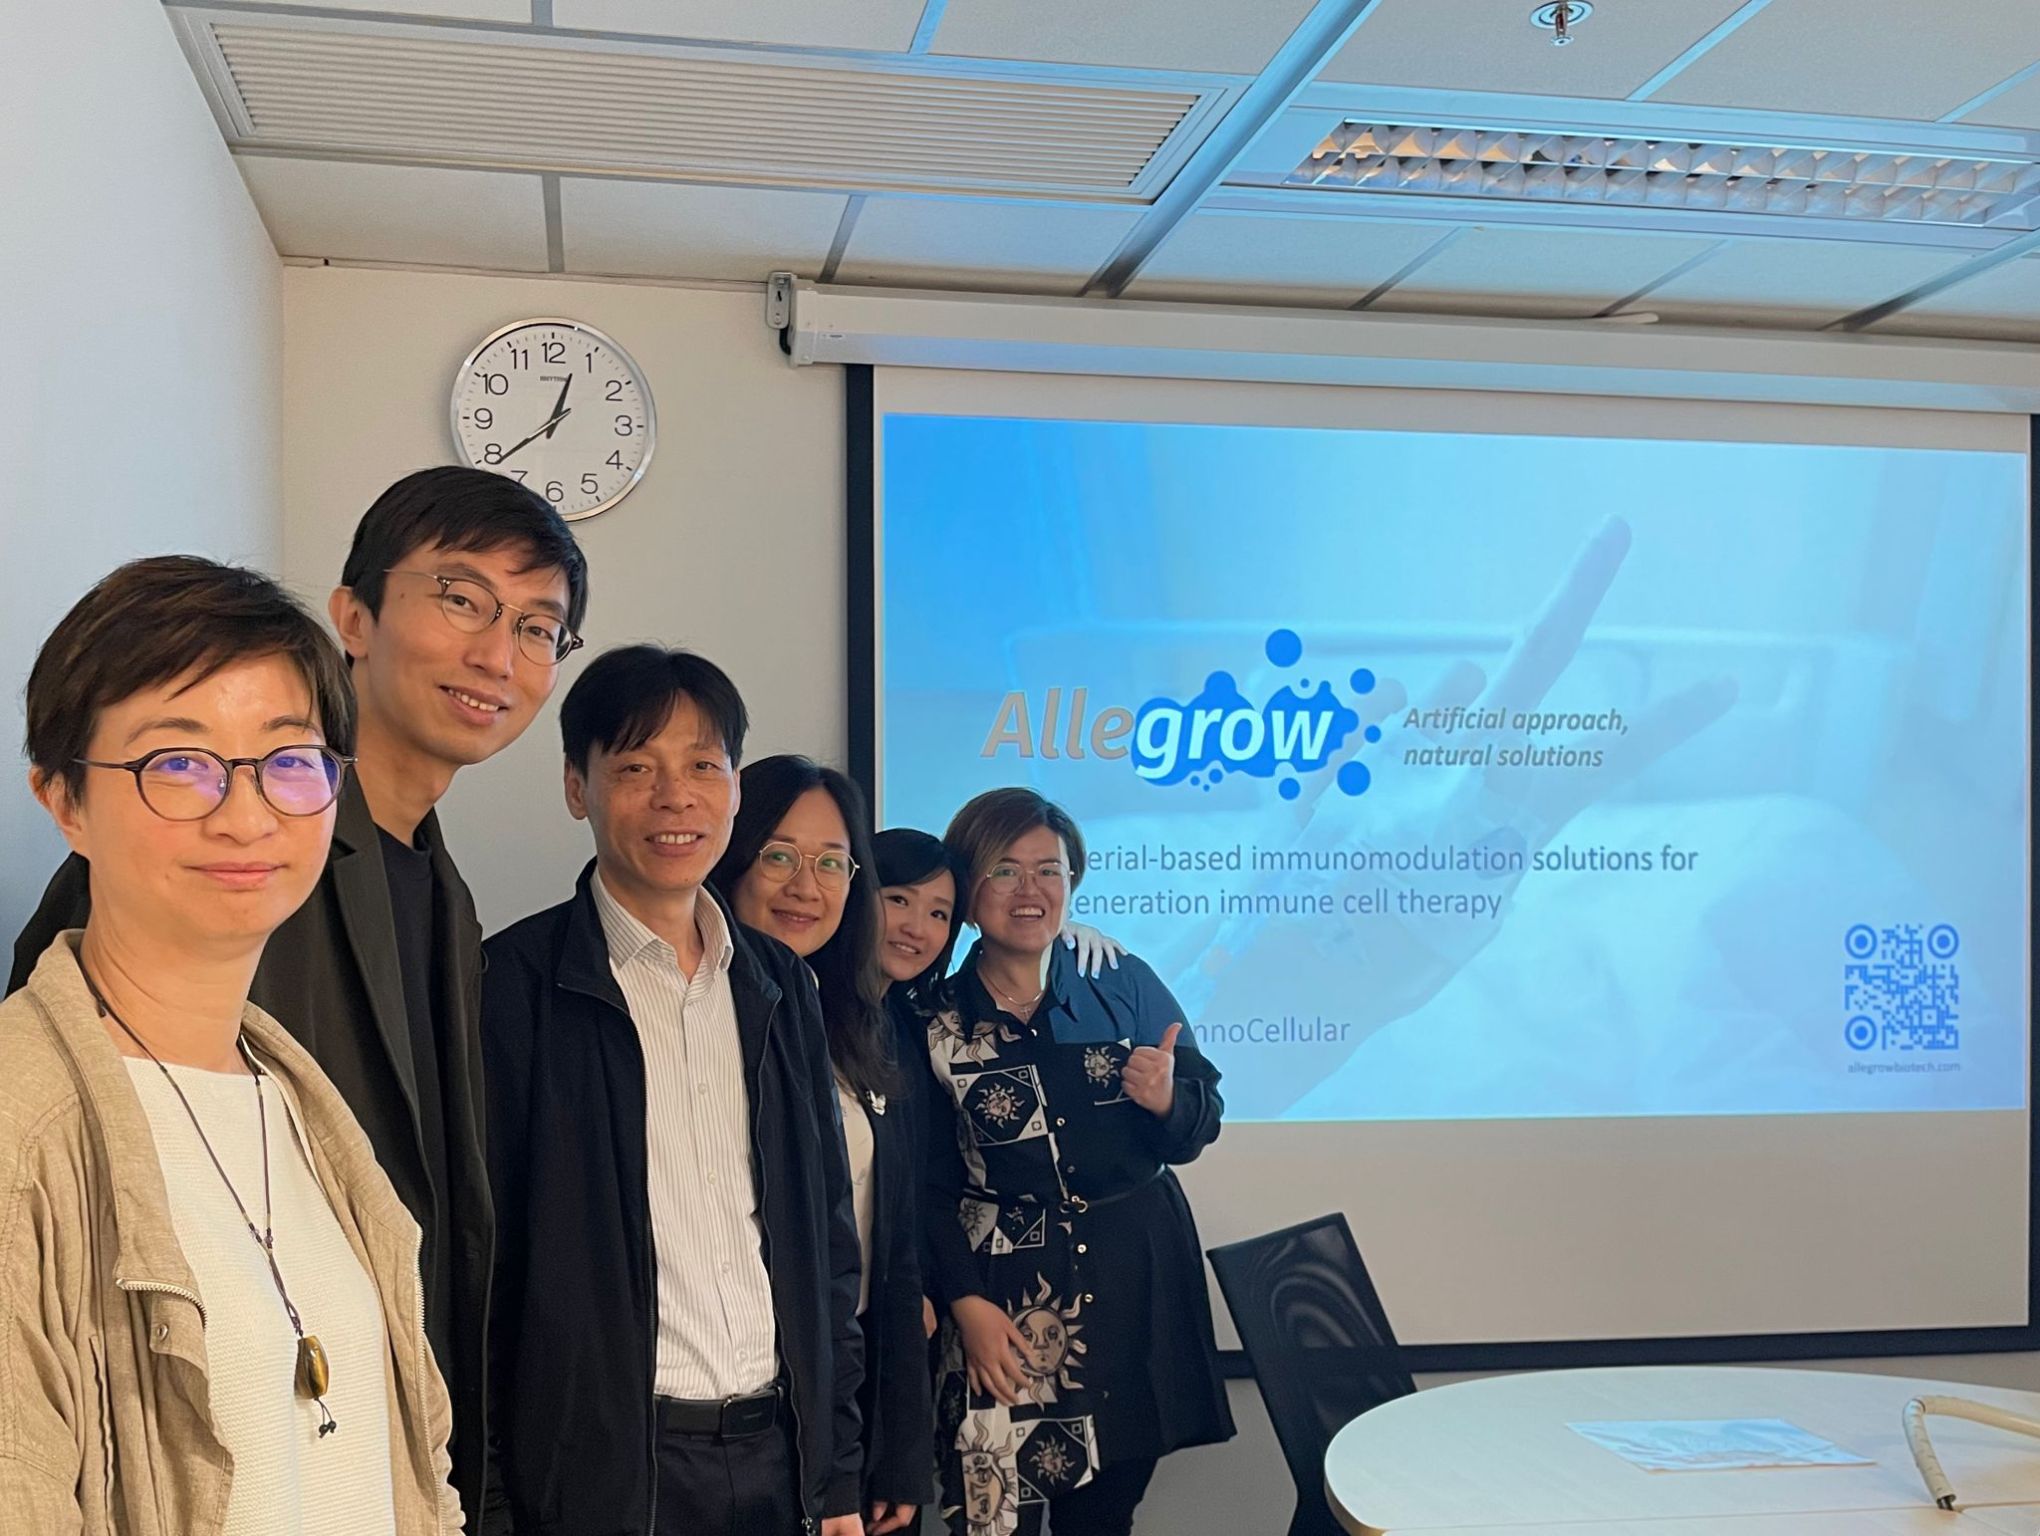 Meeting Allegrow in Hong Kong for Immune Cell Expansion Platform!